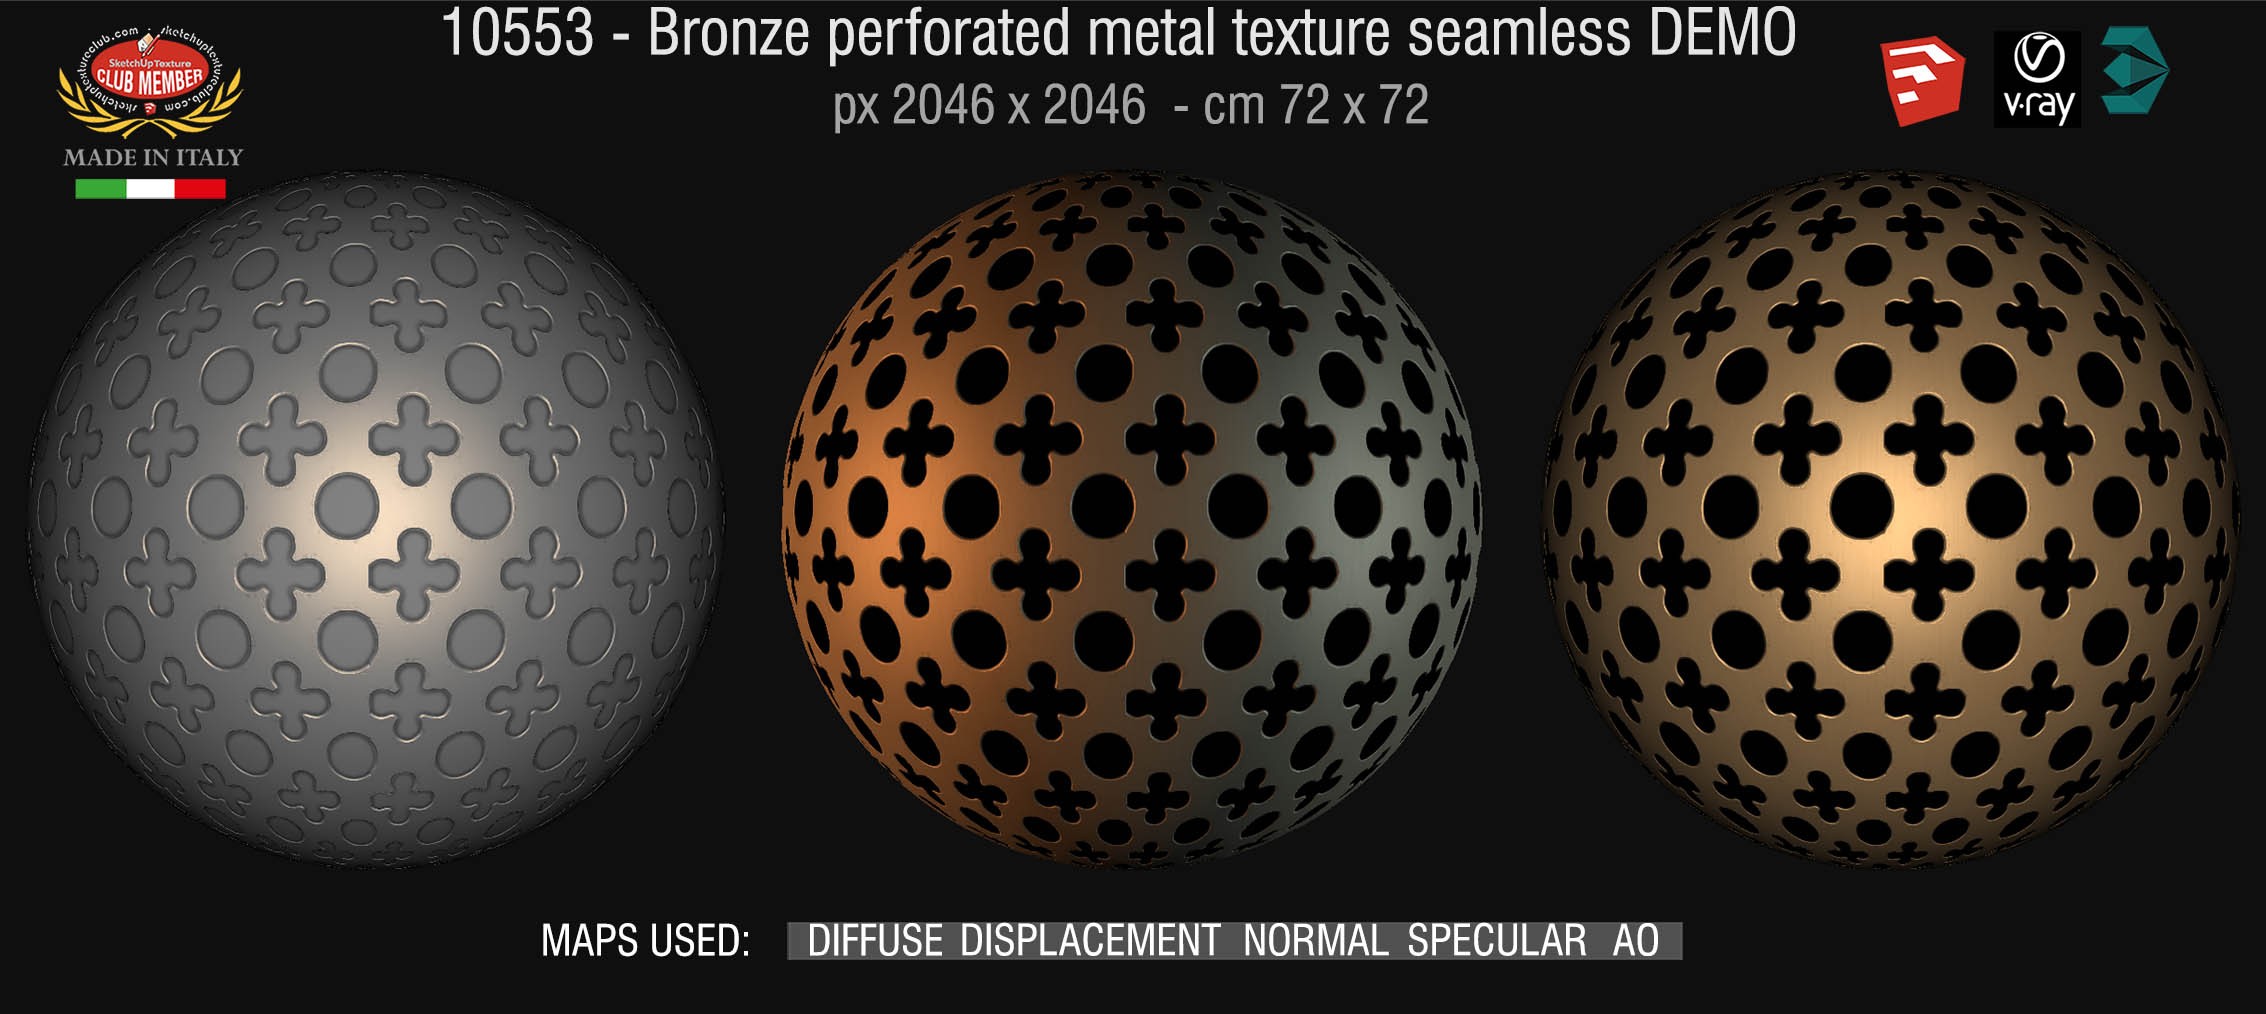 10553 HR Bronze perforated metal texture seamless + maps DEMO